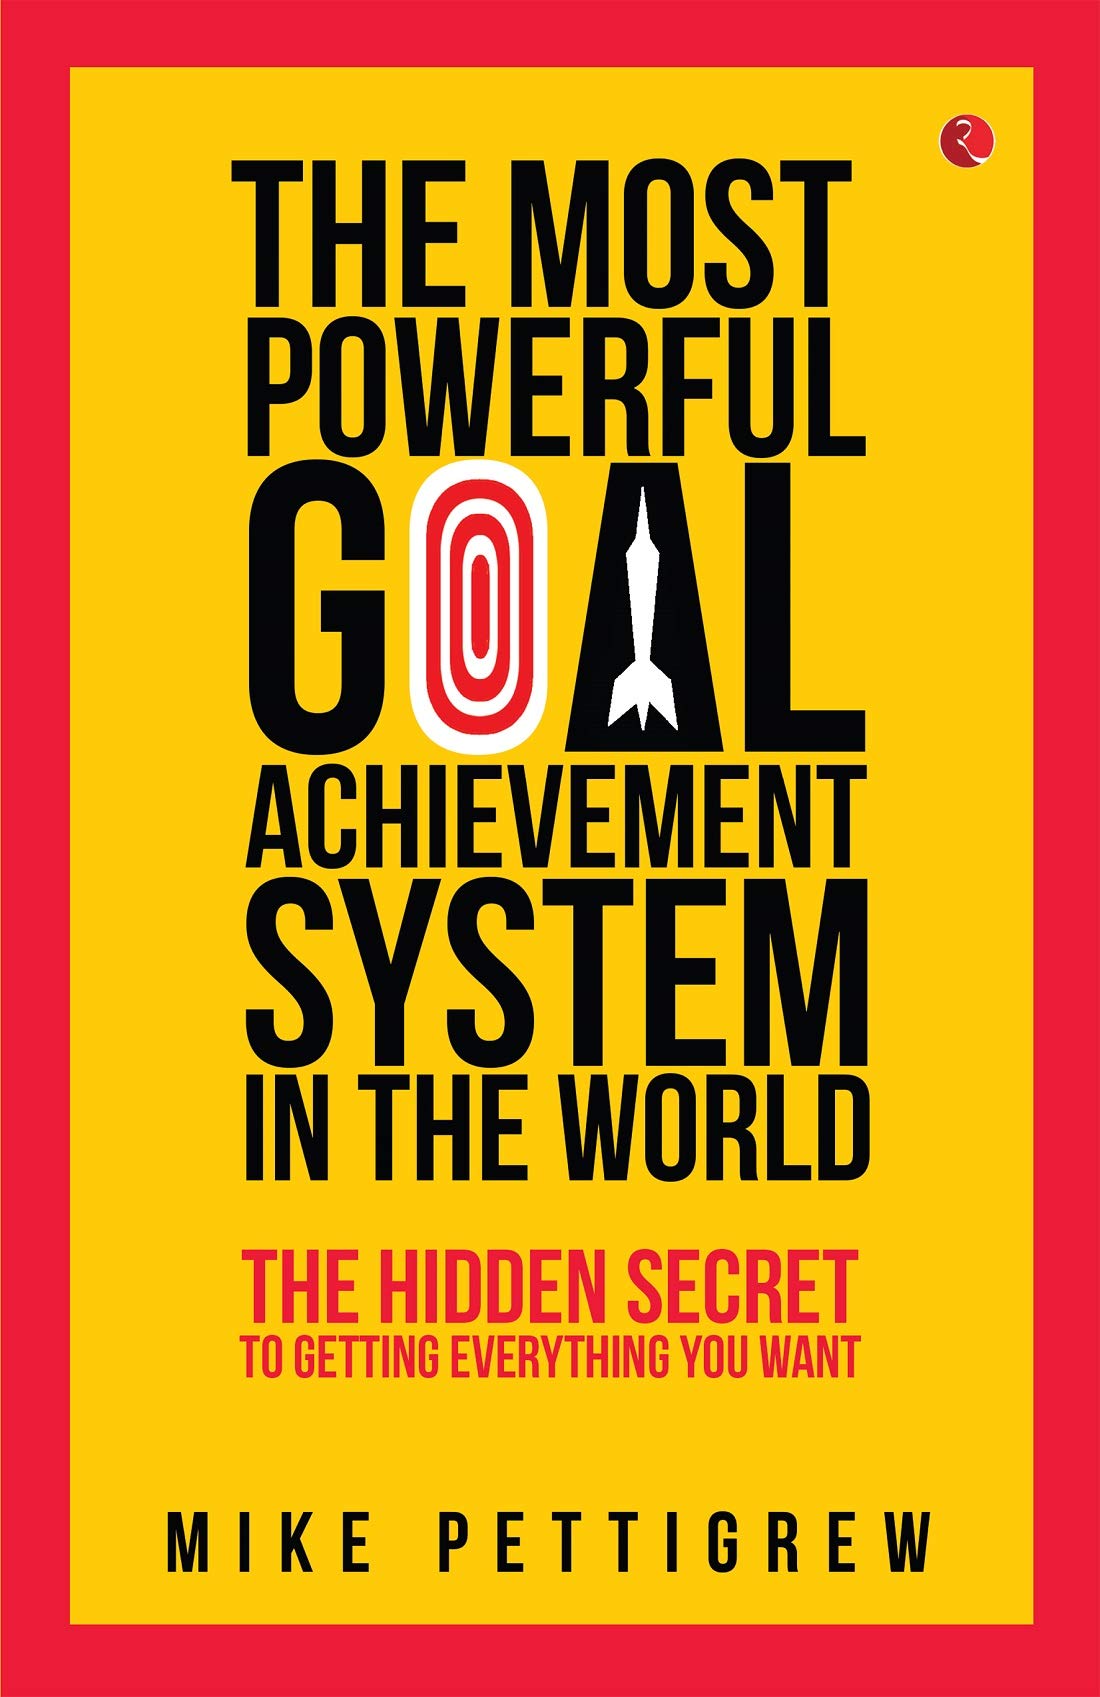 THE MOST POWERFUL GOAL ACHIEVEMENT SYSTEM